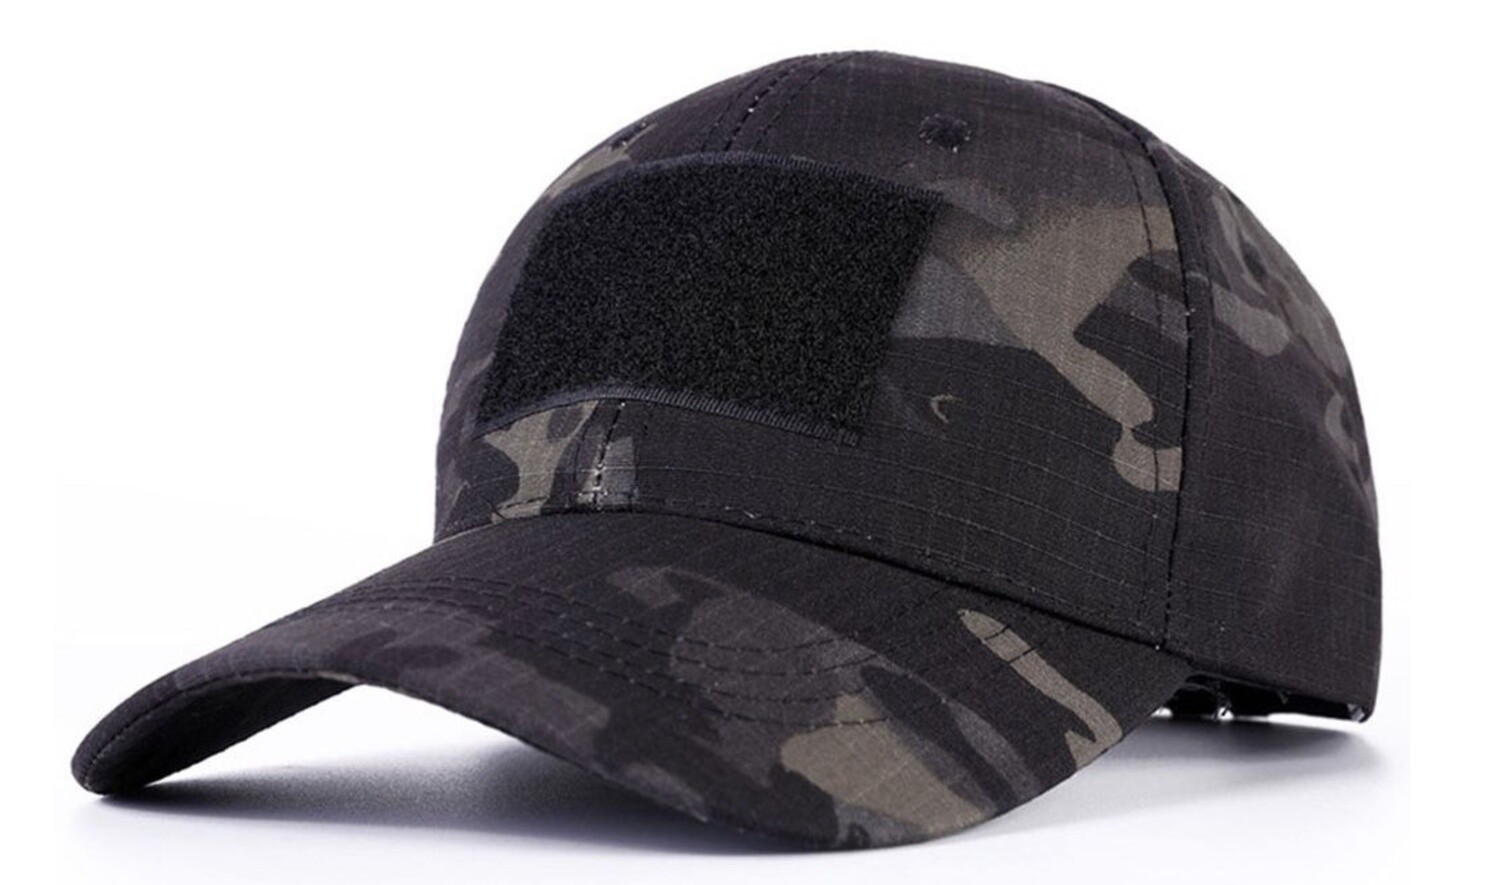 CAMPING OUTDOOR SPORT SNAP BACK TACTICAL MILITARY ARMY CAMO CAP - BLACK